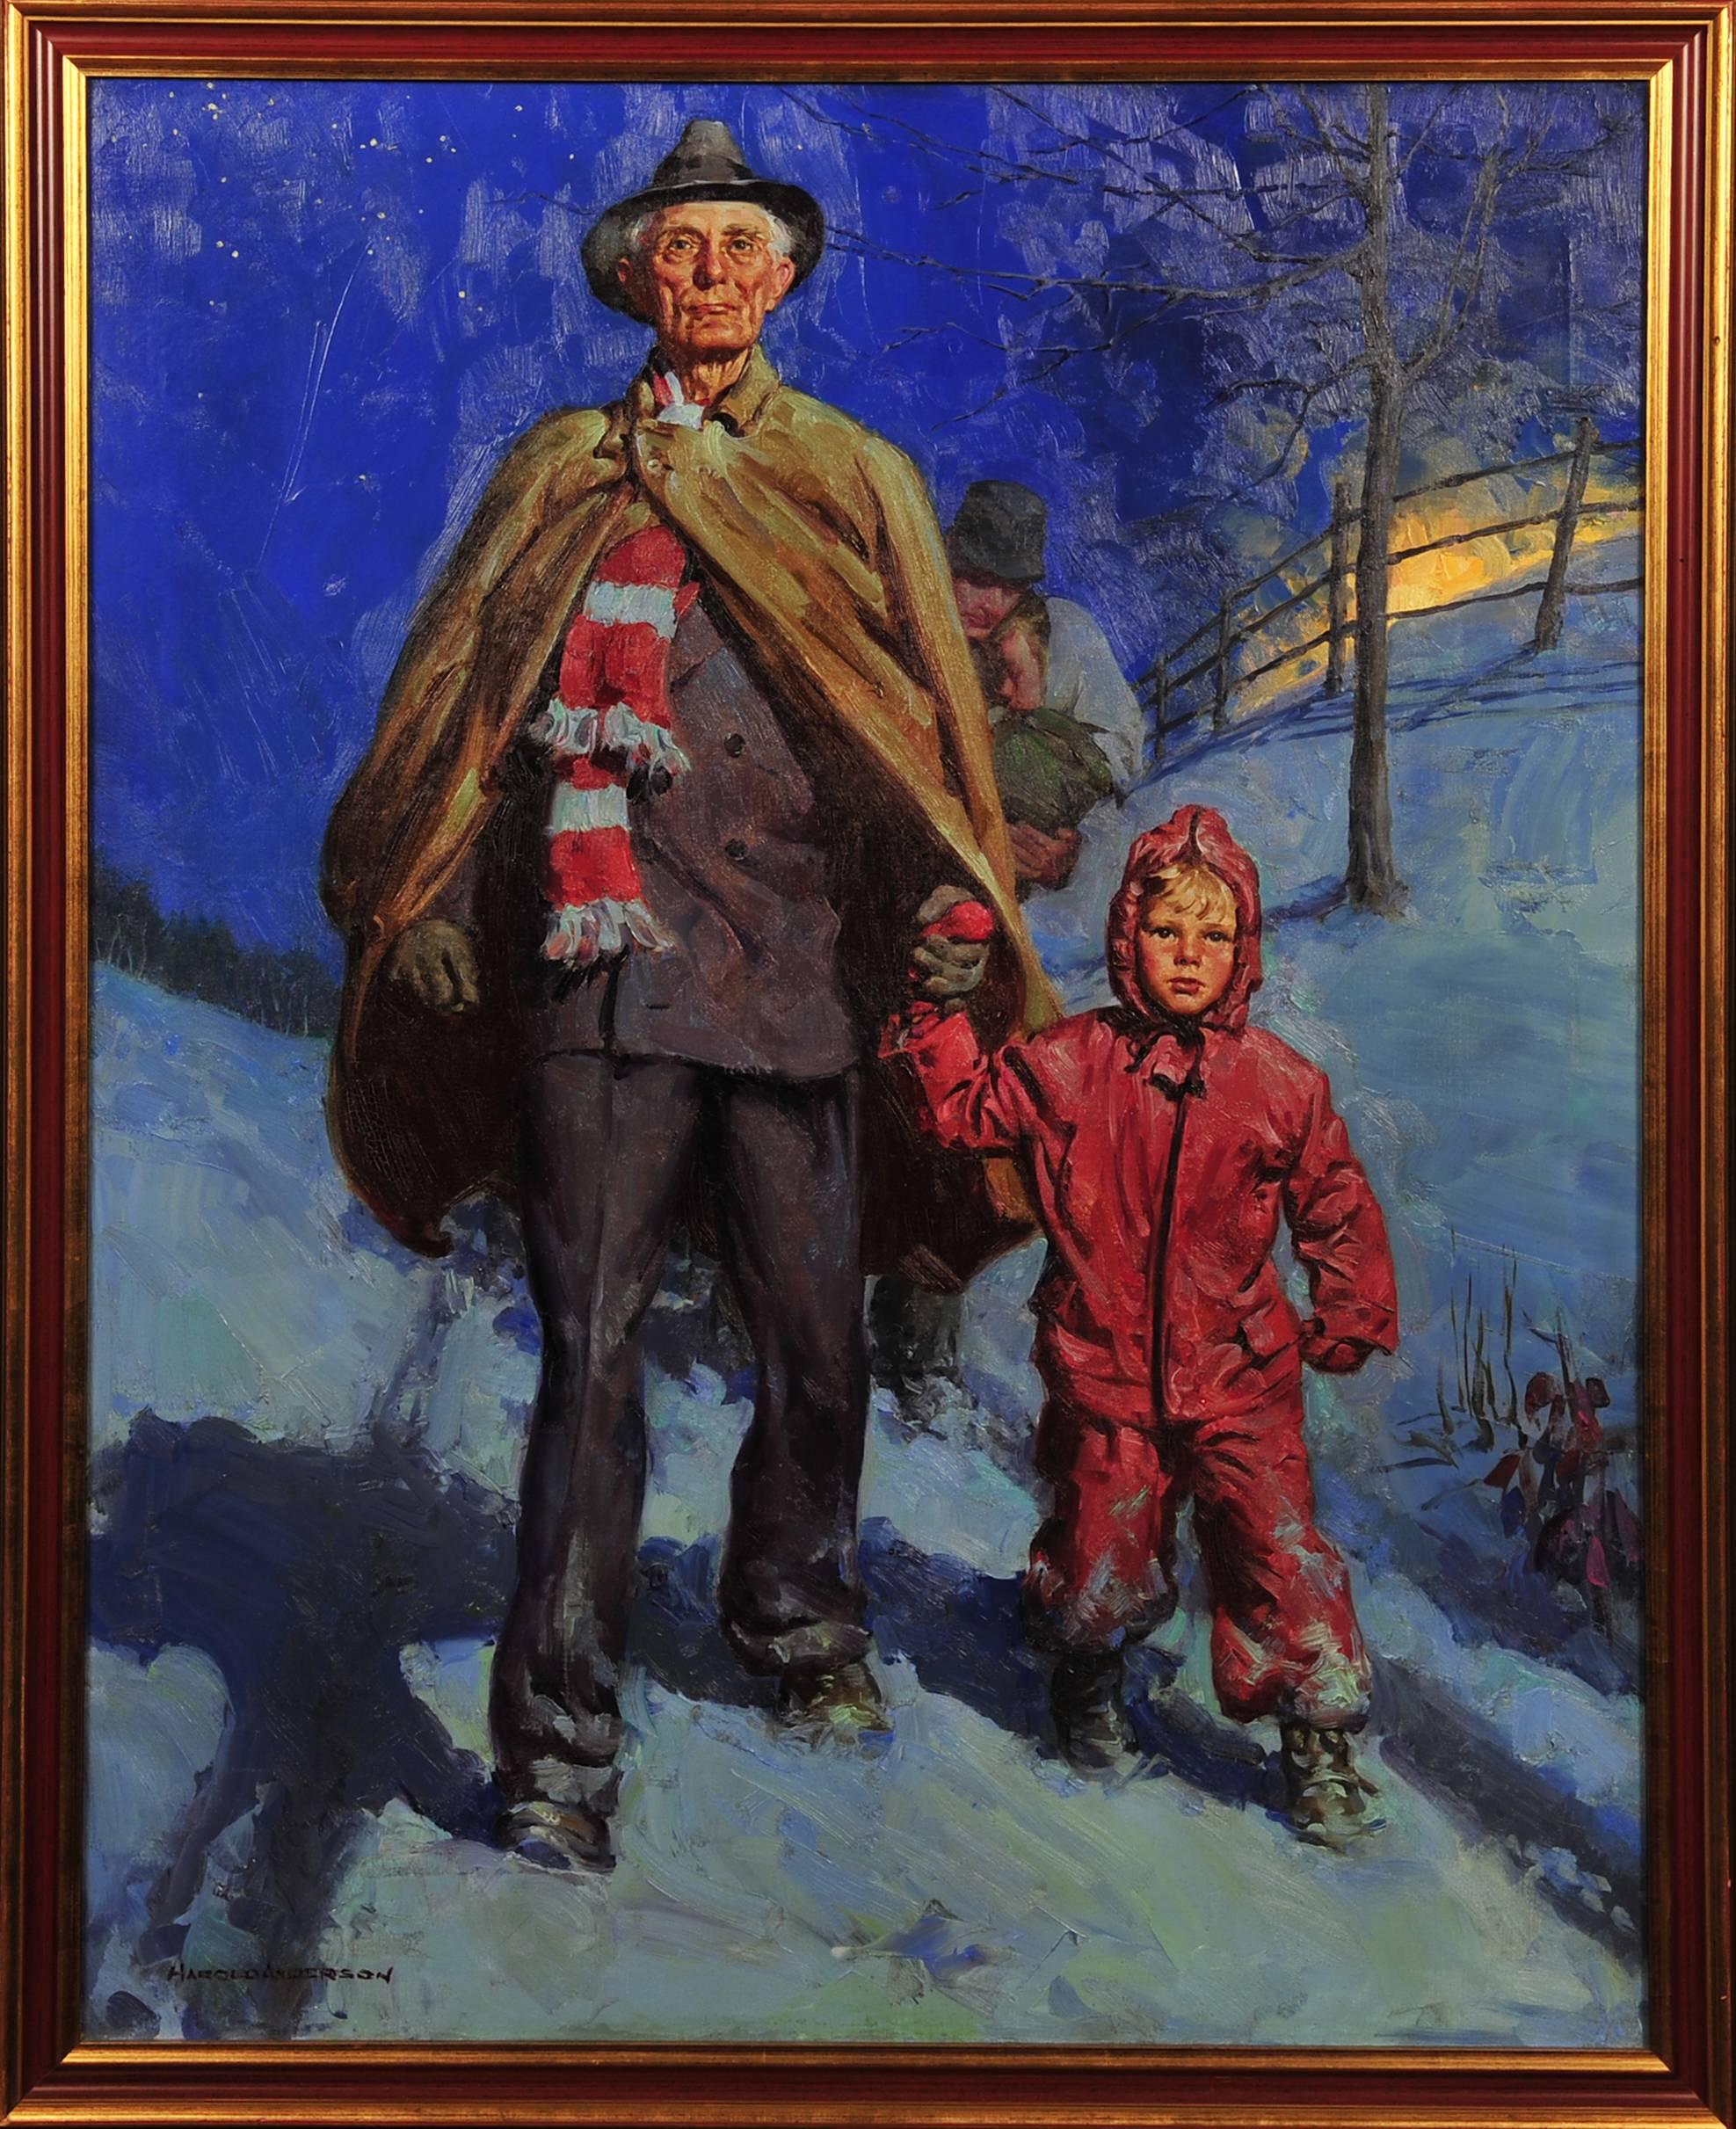 Man and Grandson Walking in the Snow - Painting by Harold Anderson